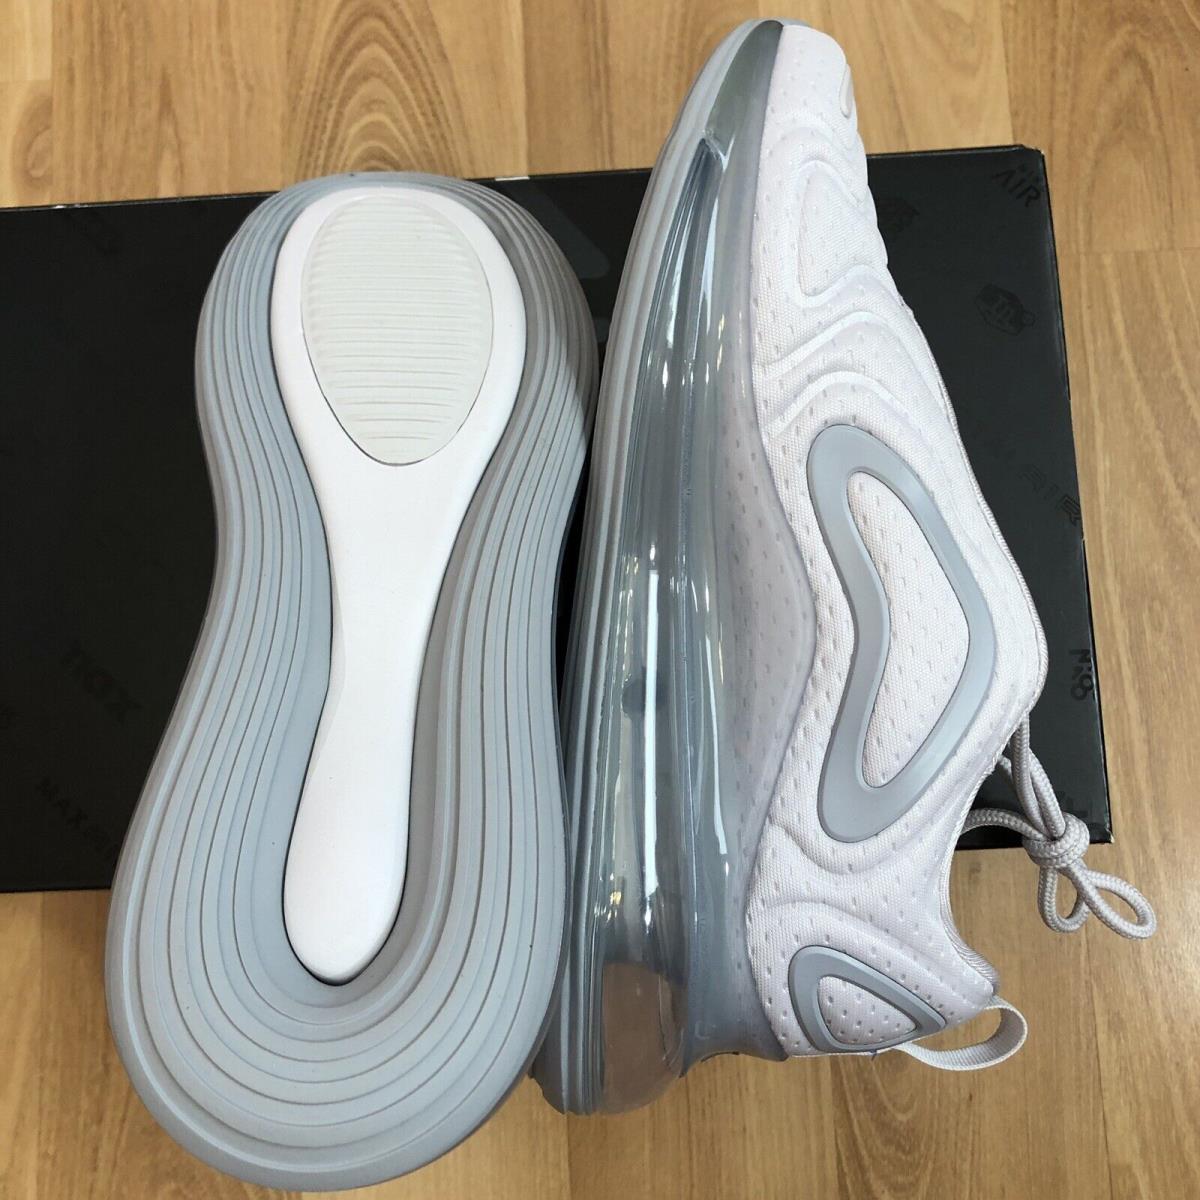 Nike shoes Air Max - Vast Gray/ Wolf Gray 5